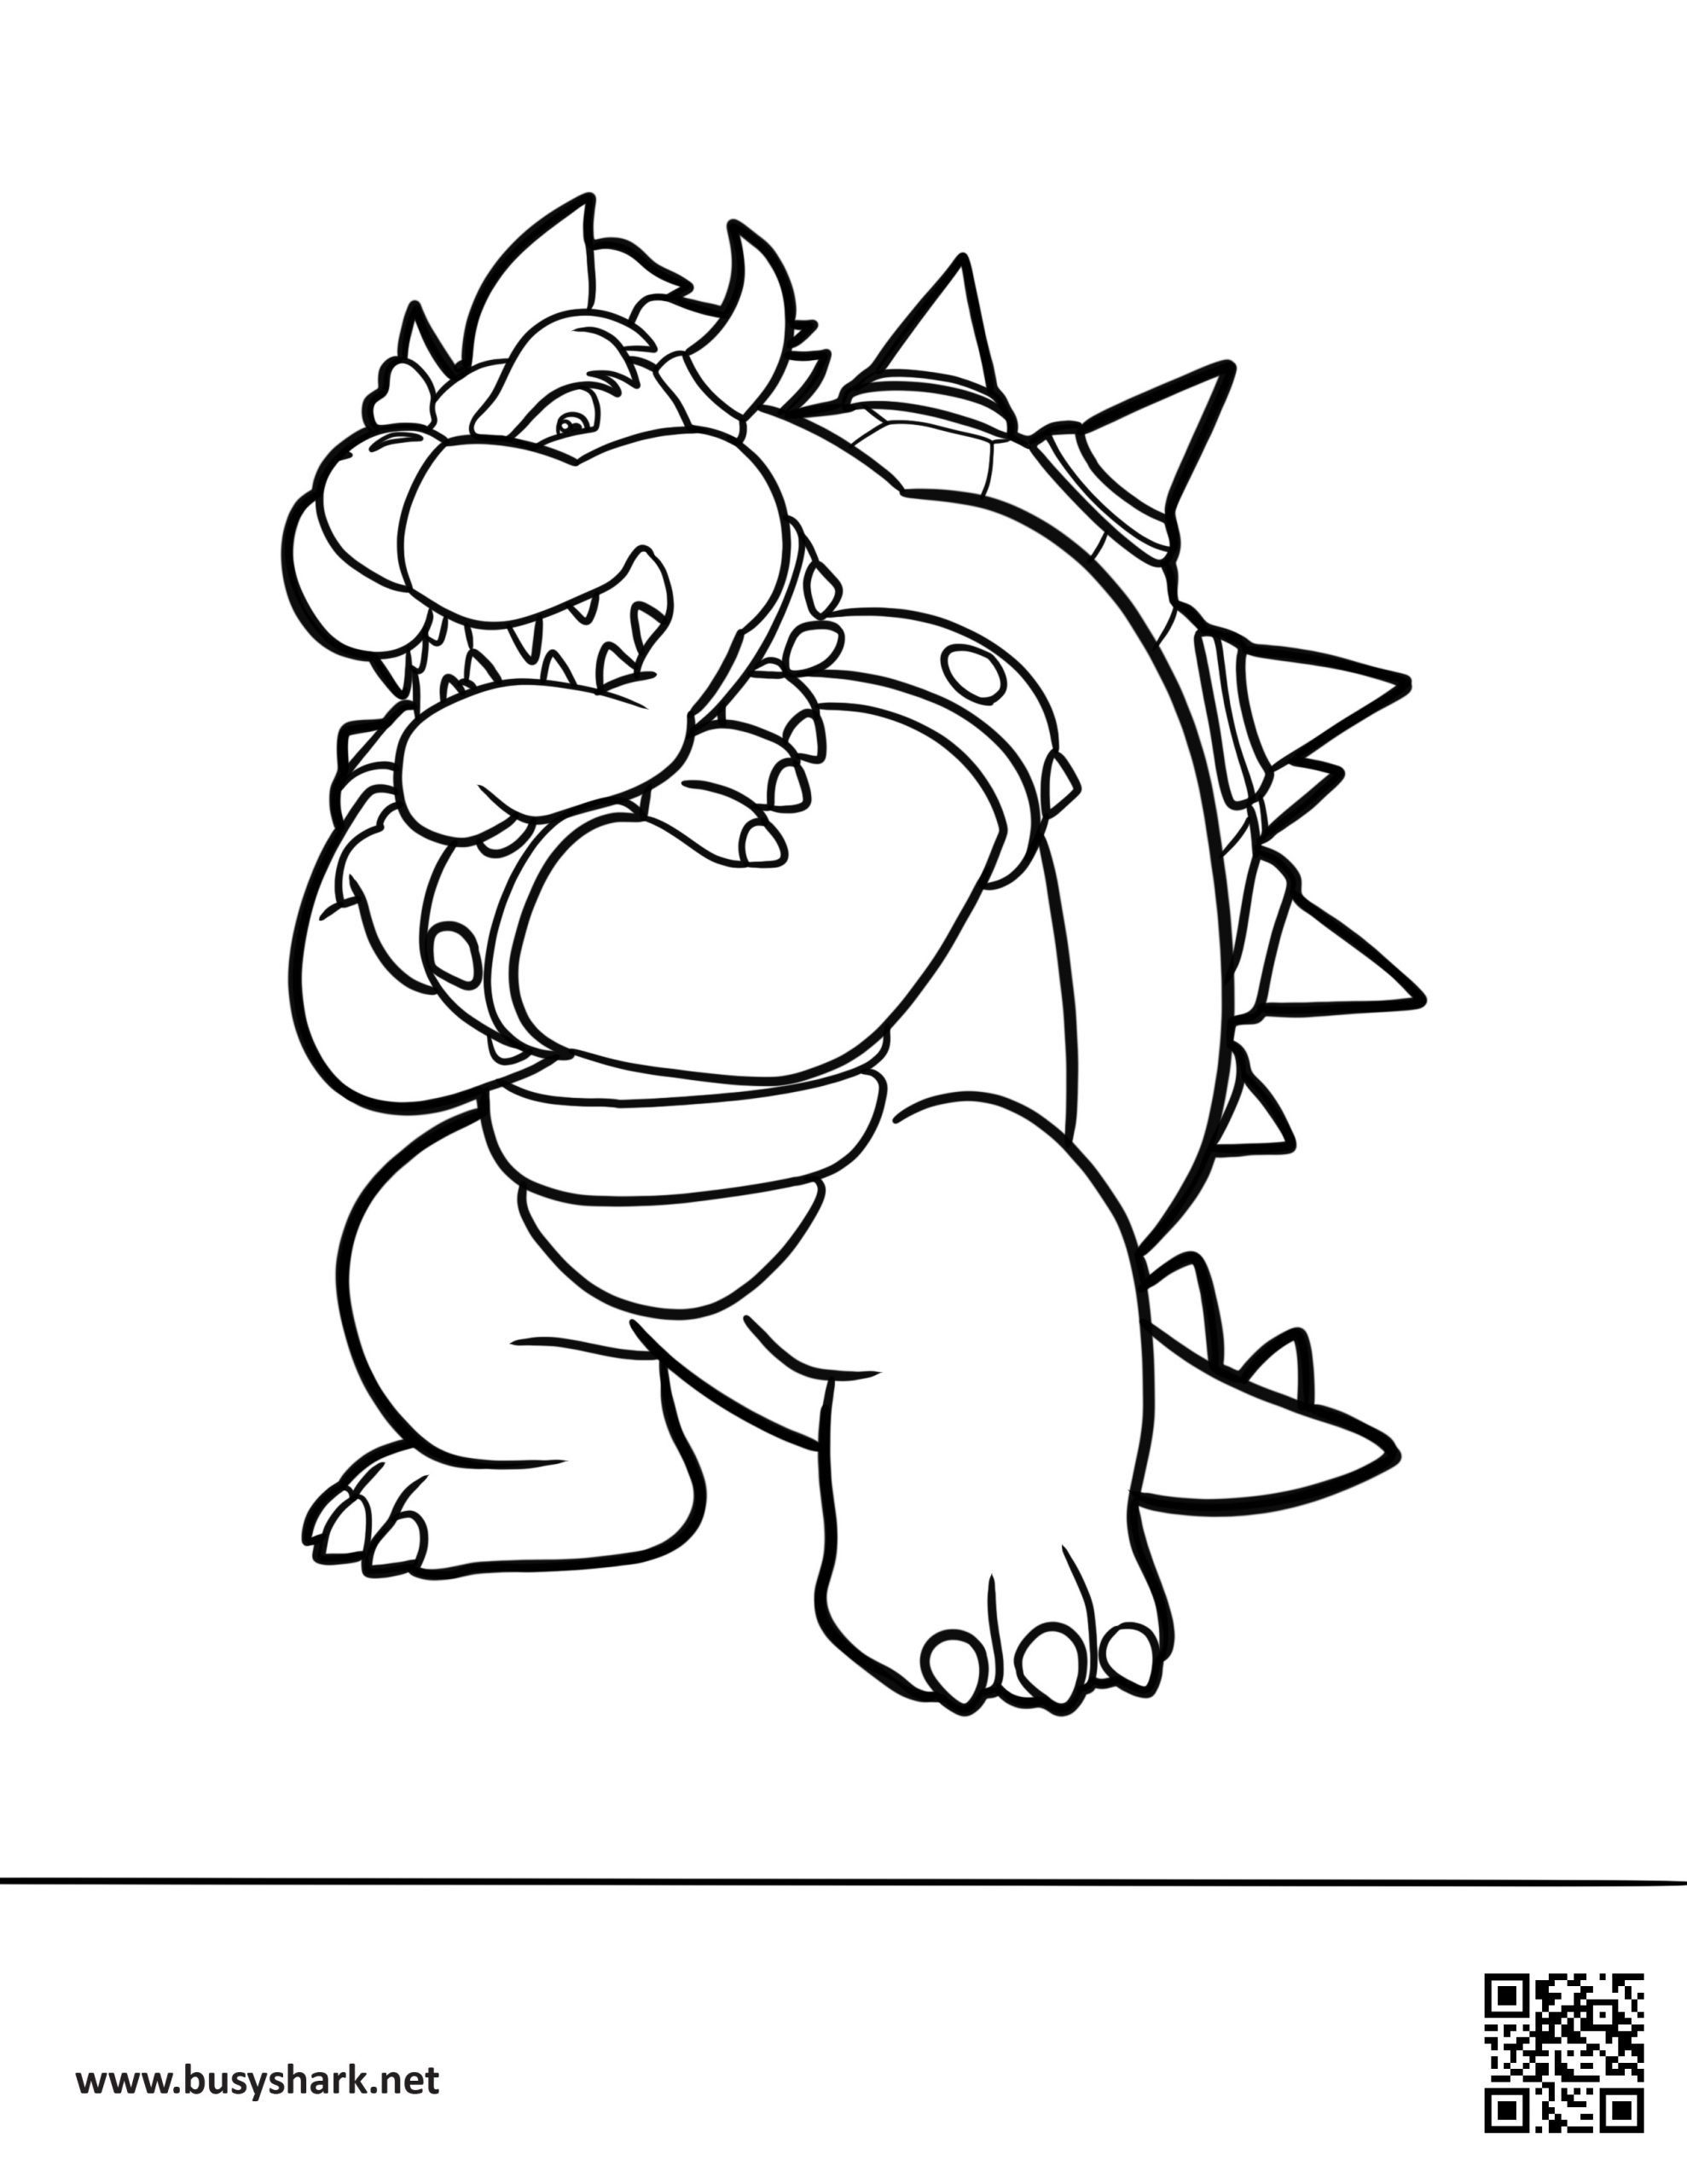 Bowser coloring page